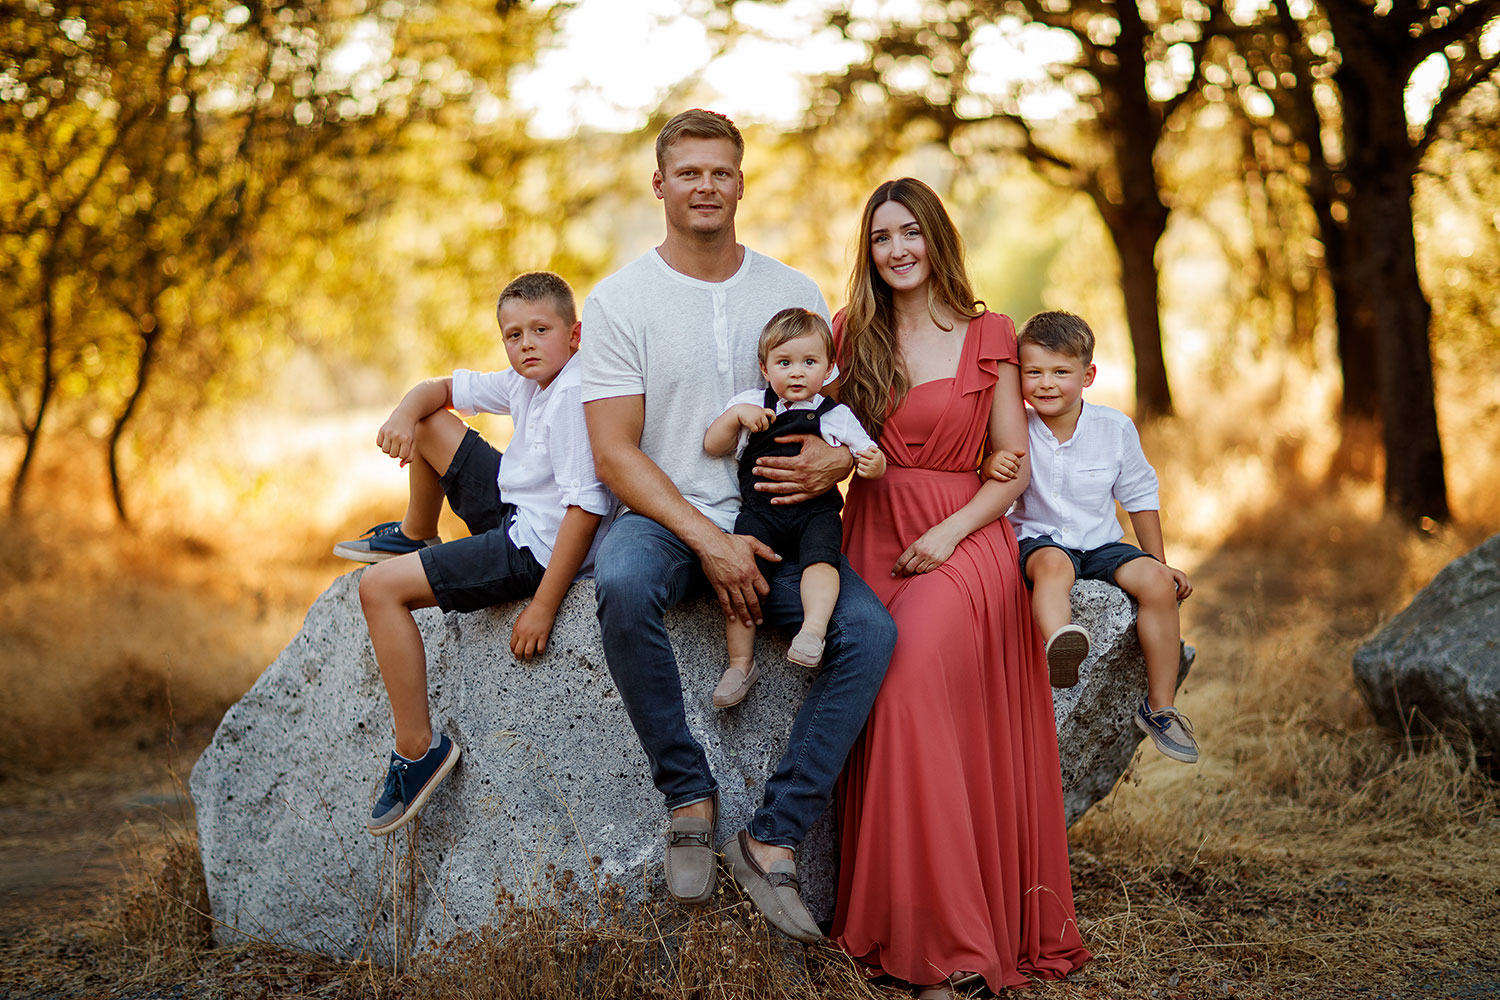 How to have fun at your family photoshoot! | Elle Baker Photography